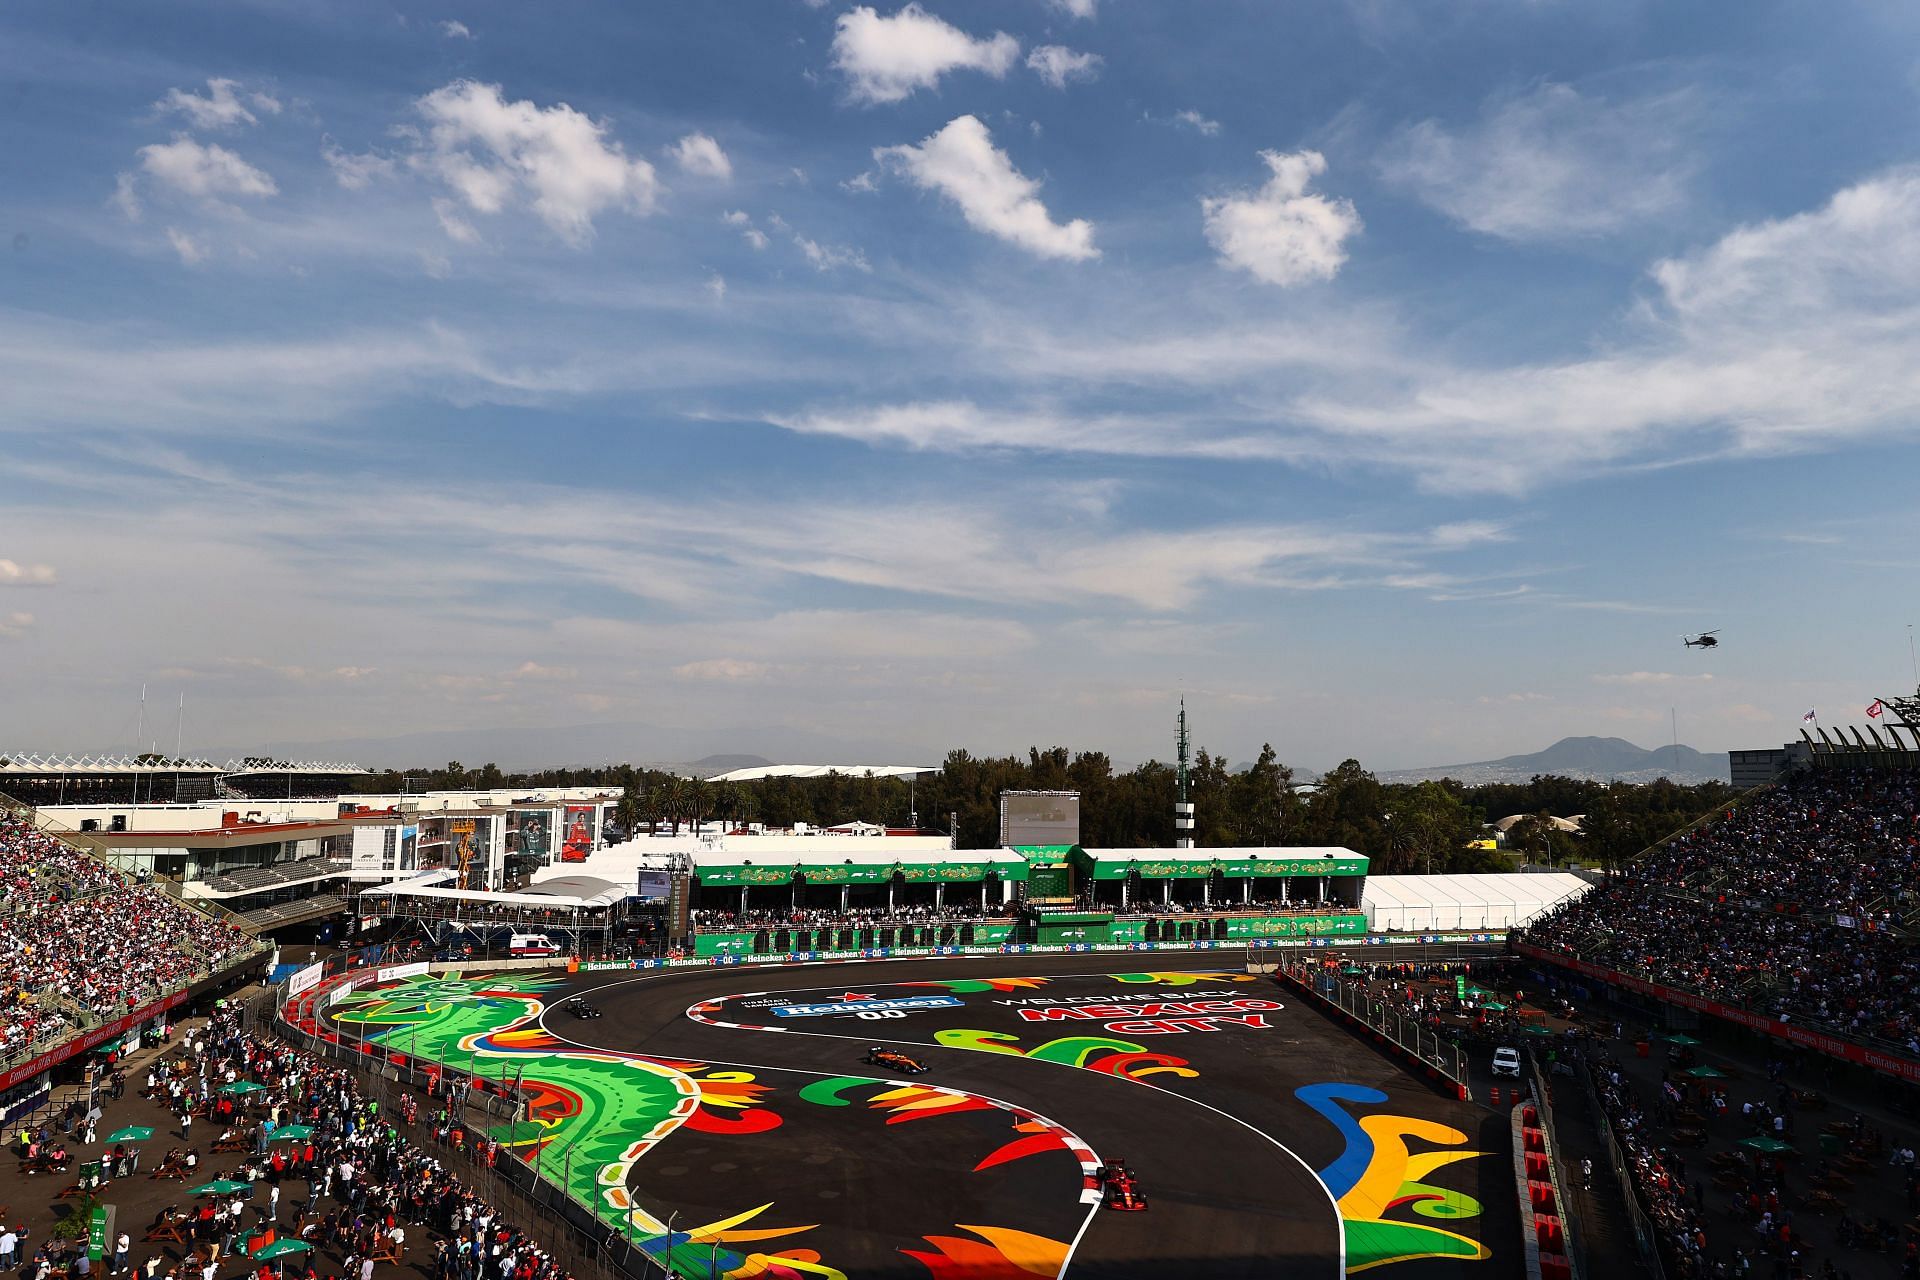 A general view of the Autodromo Hermanos Rodriguez circuit during the practice session ahead of the 2021 Mexican GP. (Photo by Mark Thompson/Getty Images)